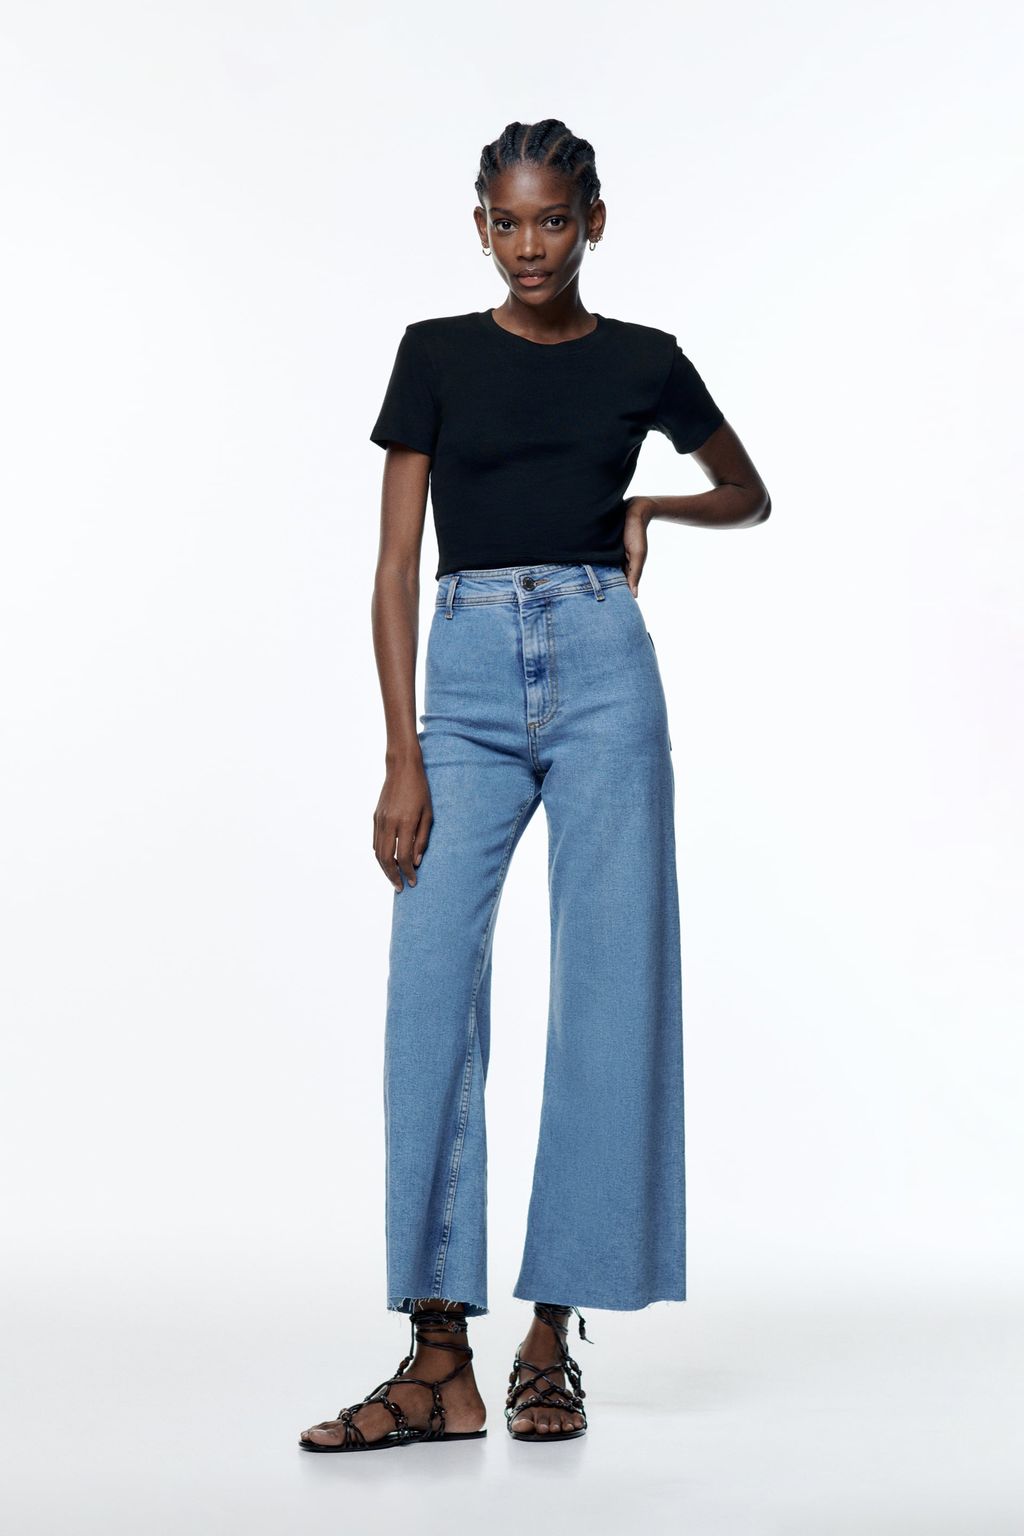 My Sisters and I Are Fighting Over These 30 Zara Items | Who What Wear